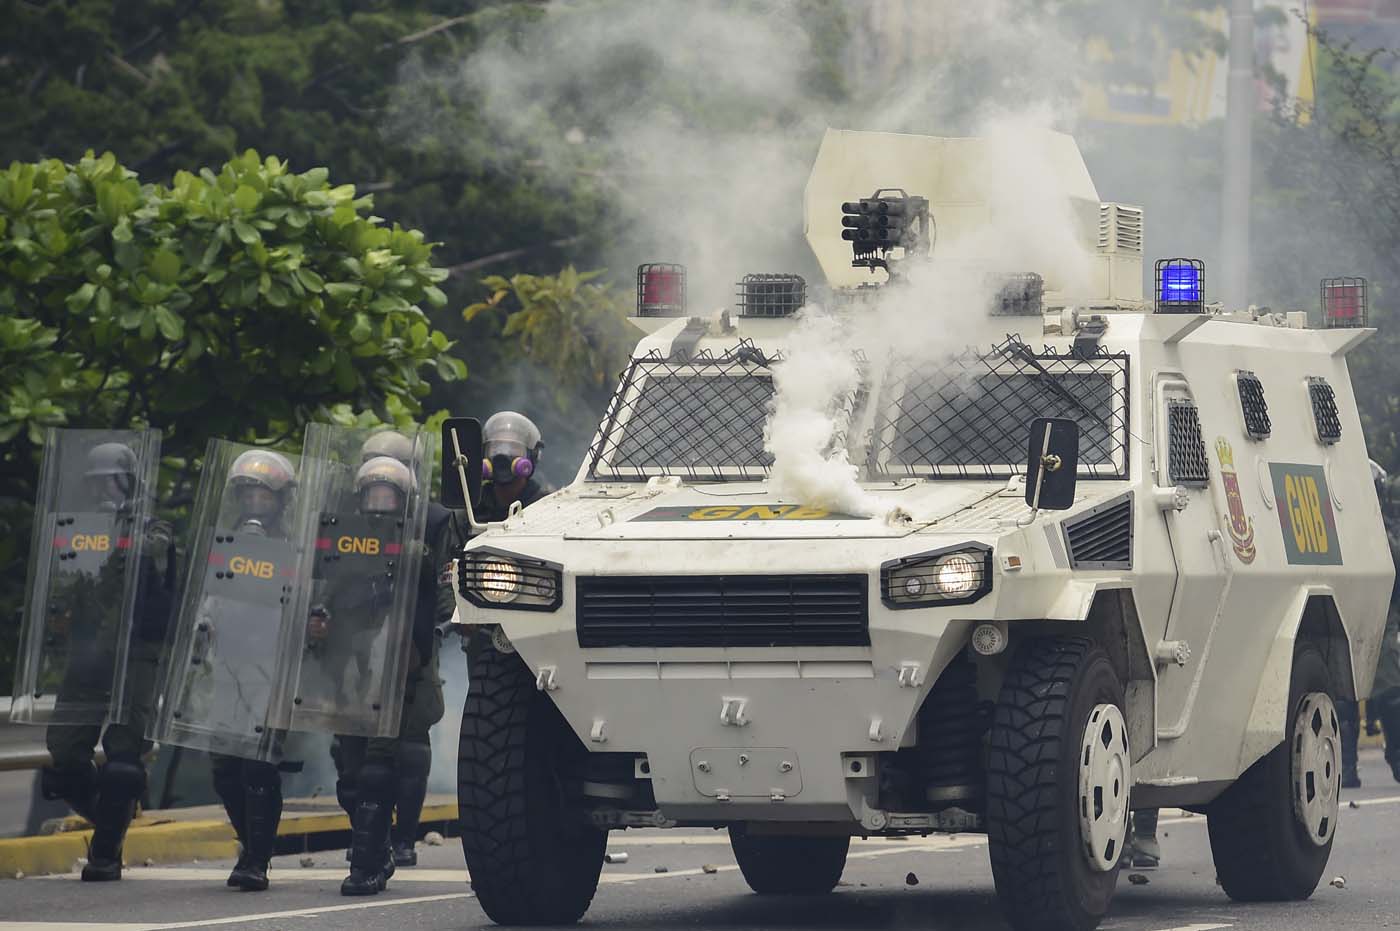 Riot police agents next to an armoured vehicle move forward along a blocked street, during clashes within a protest against Venezuelan President Nicolas Maduro, in Caracas on May 3, 2017. Venezuela's angry opposition rallied Wednesday vowing huge street protests against President Nicolas Maduro's plan to rewrite the constitution and accusing him of dodging elections to cling to power despite deadly unrest. / AFP PHOTO / RONALDO SCHEMIDT